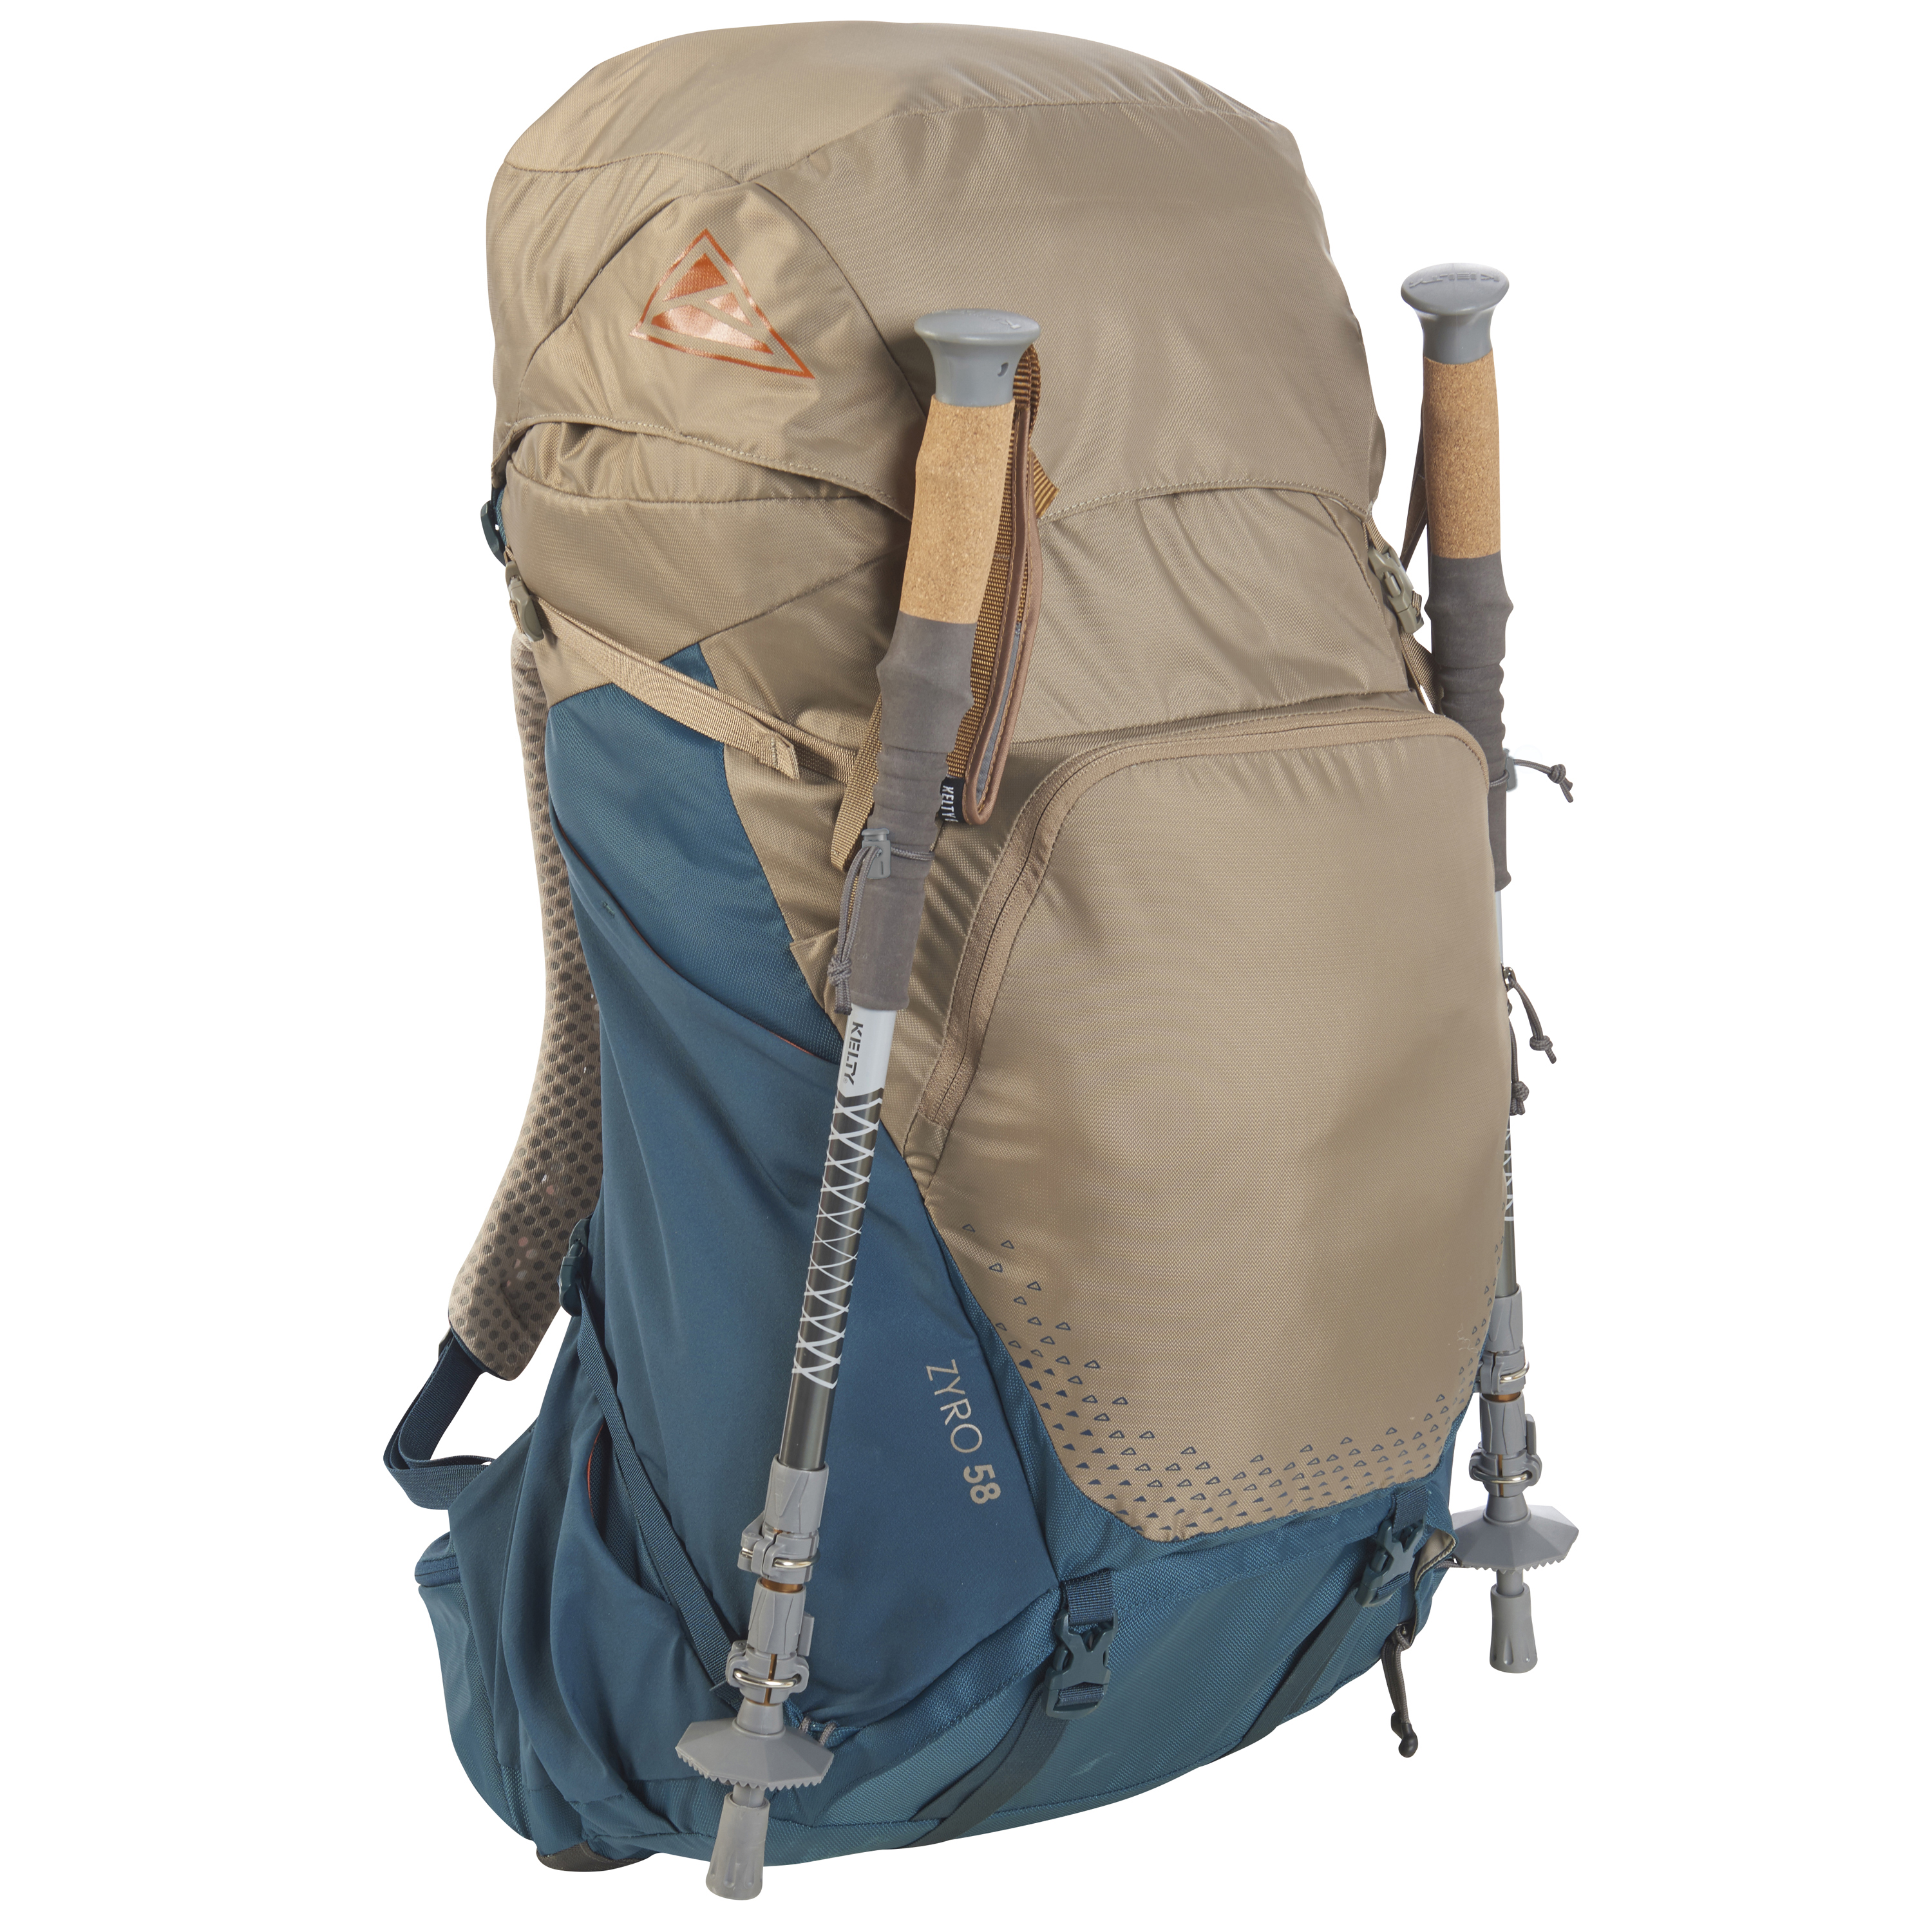 Kelty Zyro 58 backpack, Fallen Rock/Reflecting Pond, with trekking poles attached to sides of pack